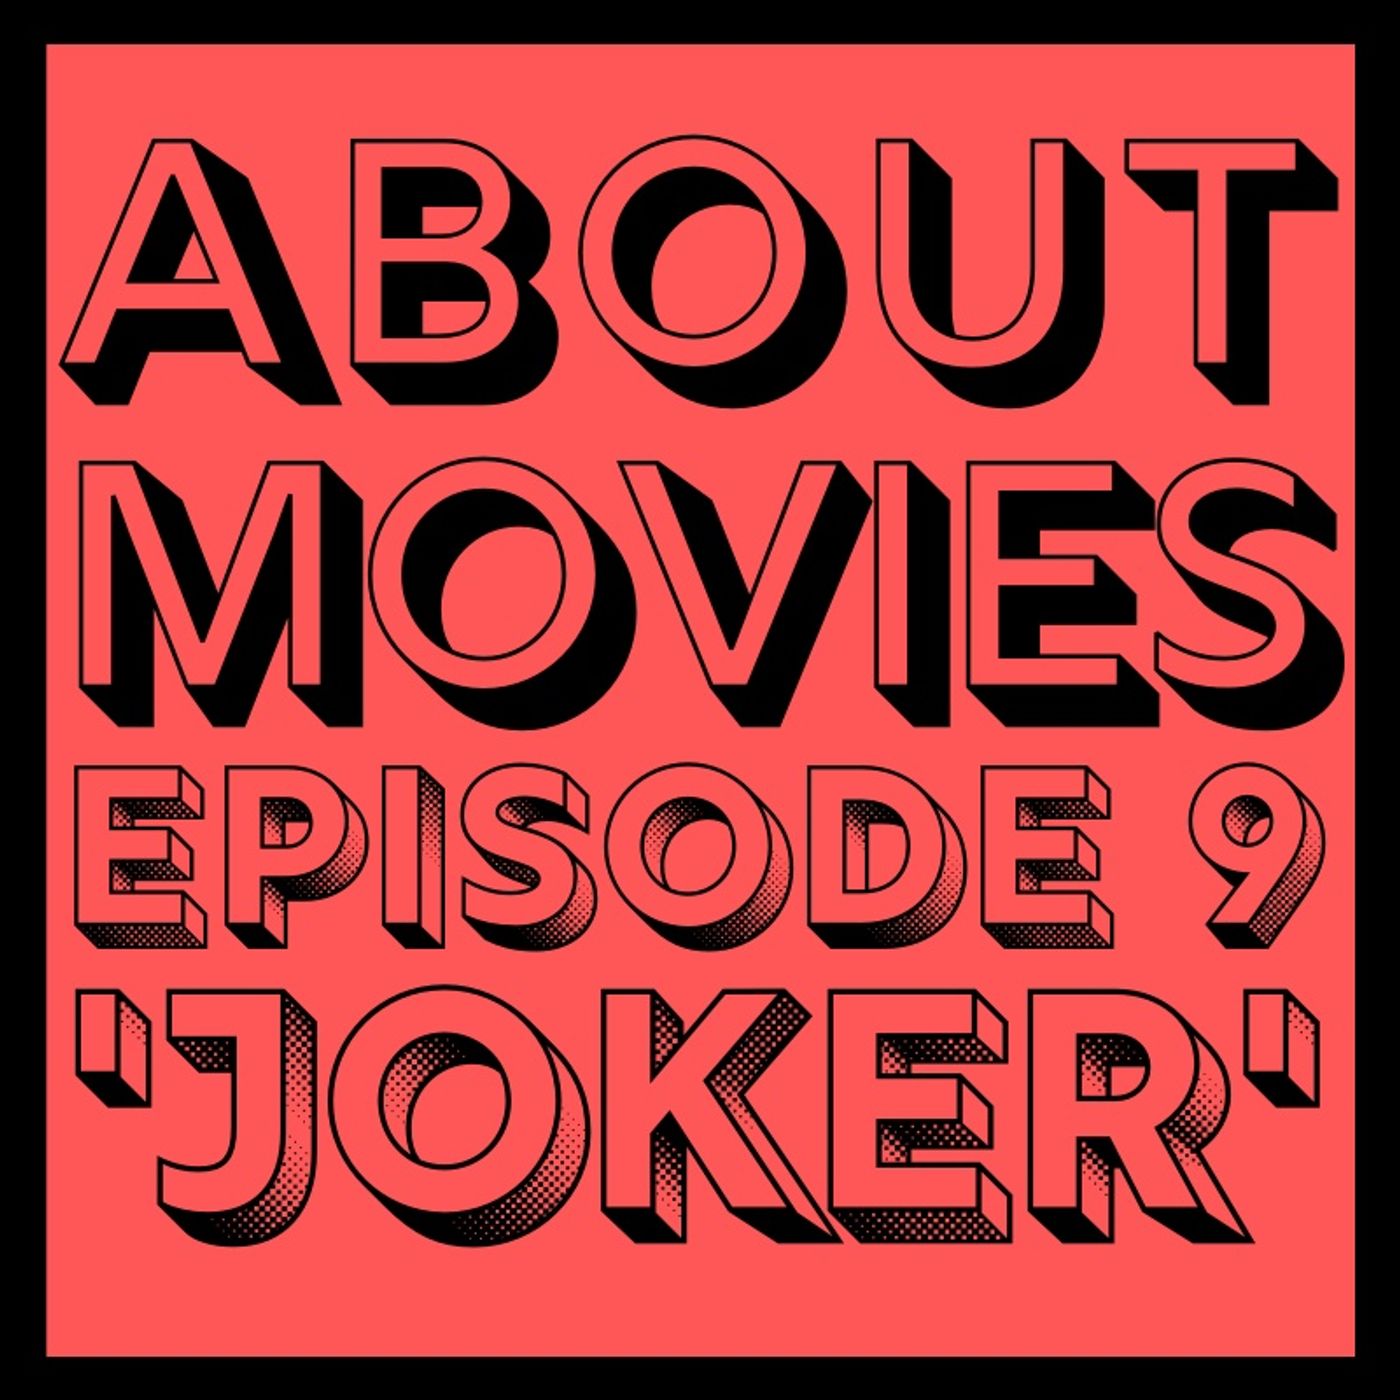 Is 'Joker' worth discussing? A discussion.